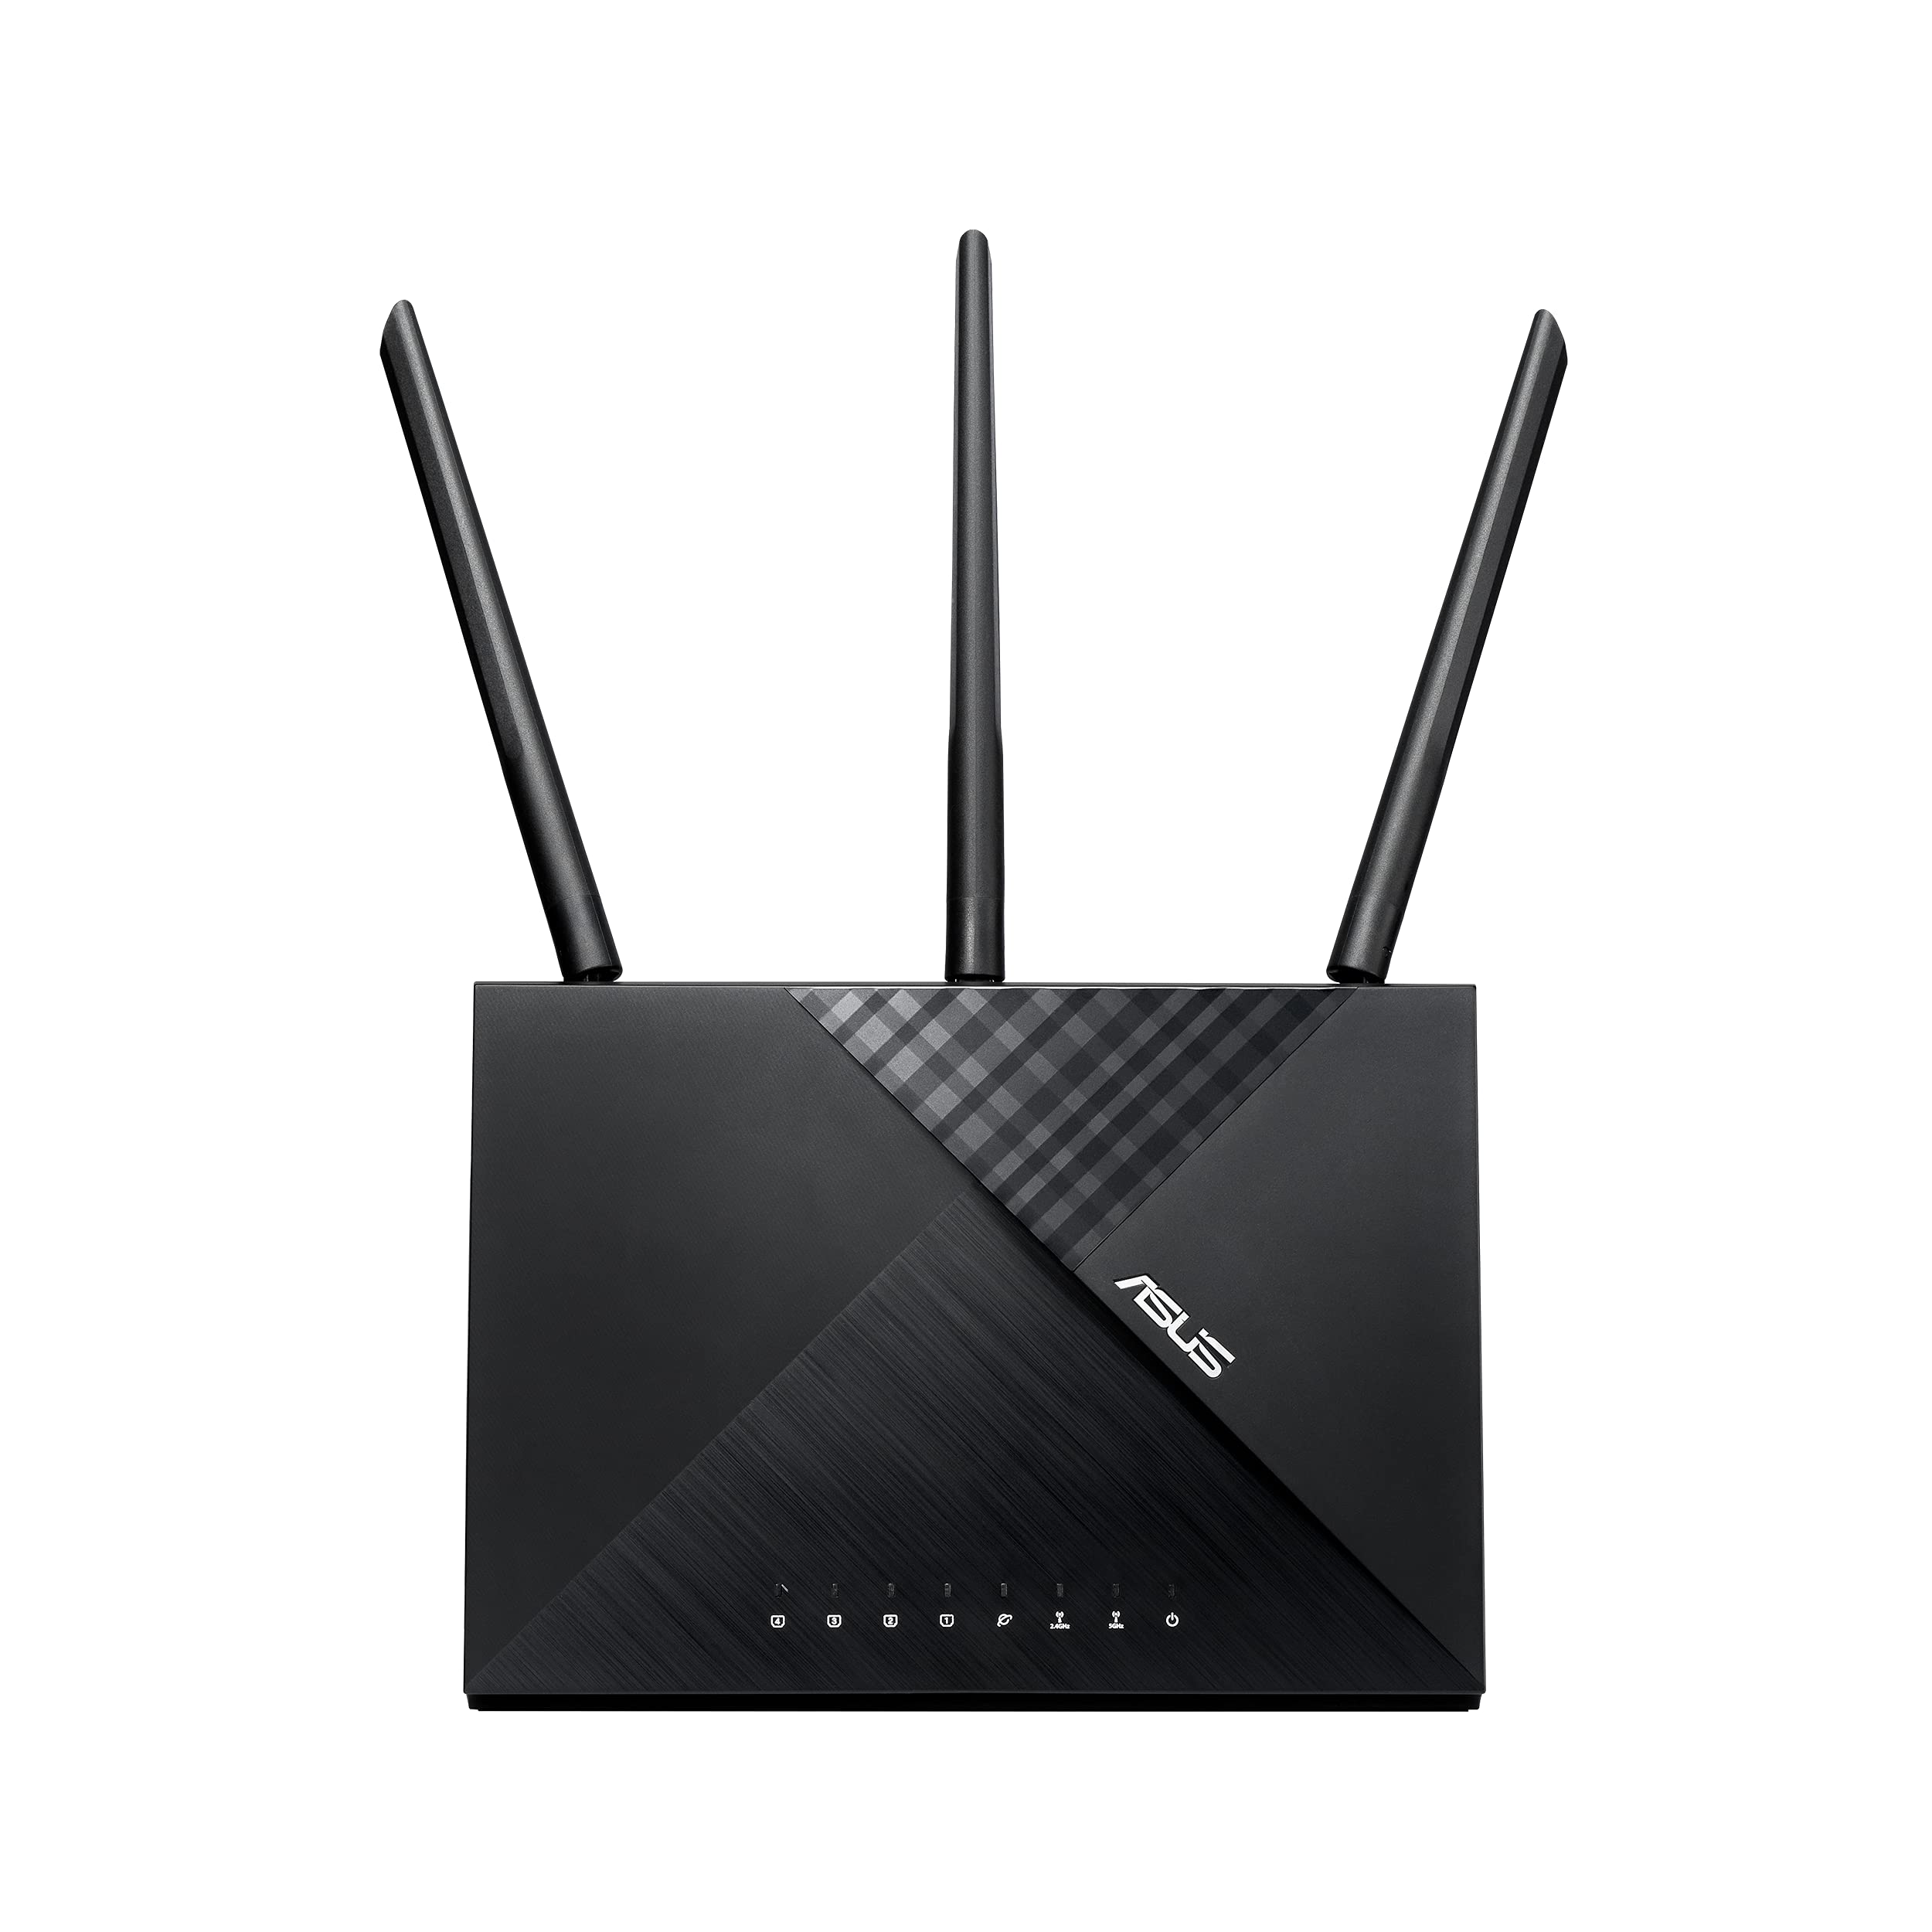 $39.99: ASUS AC1900 WiFi Router (RT-AC67P)